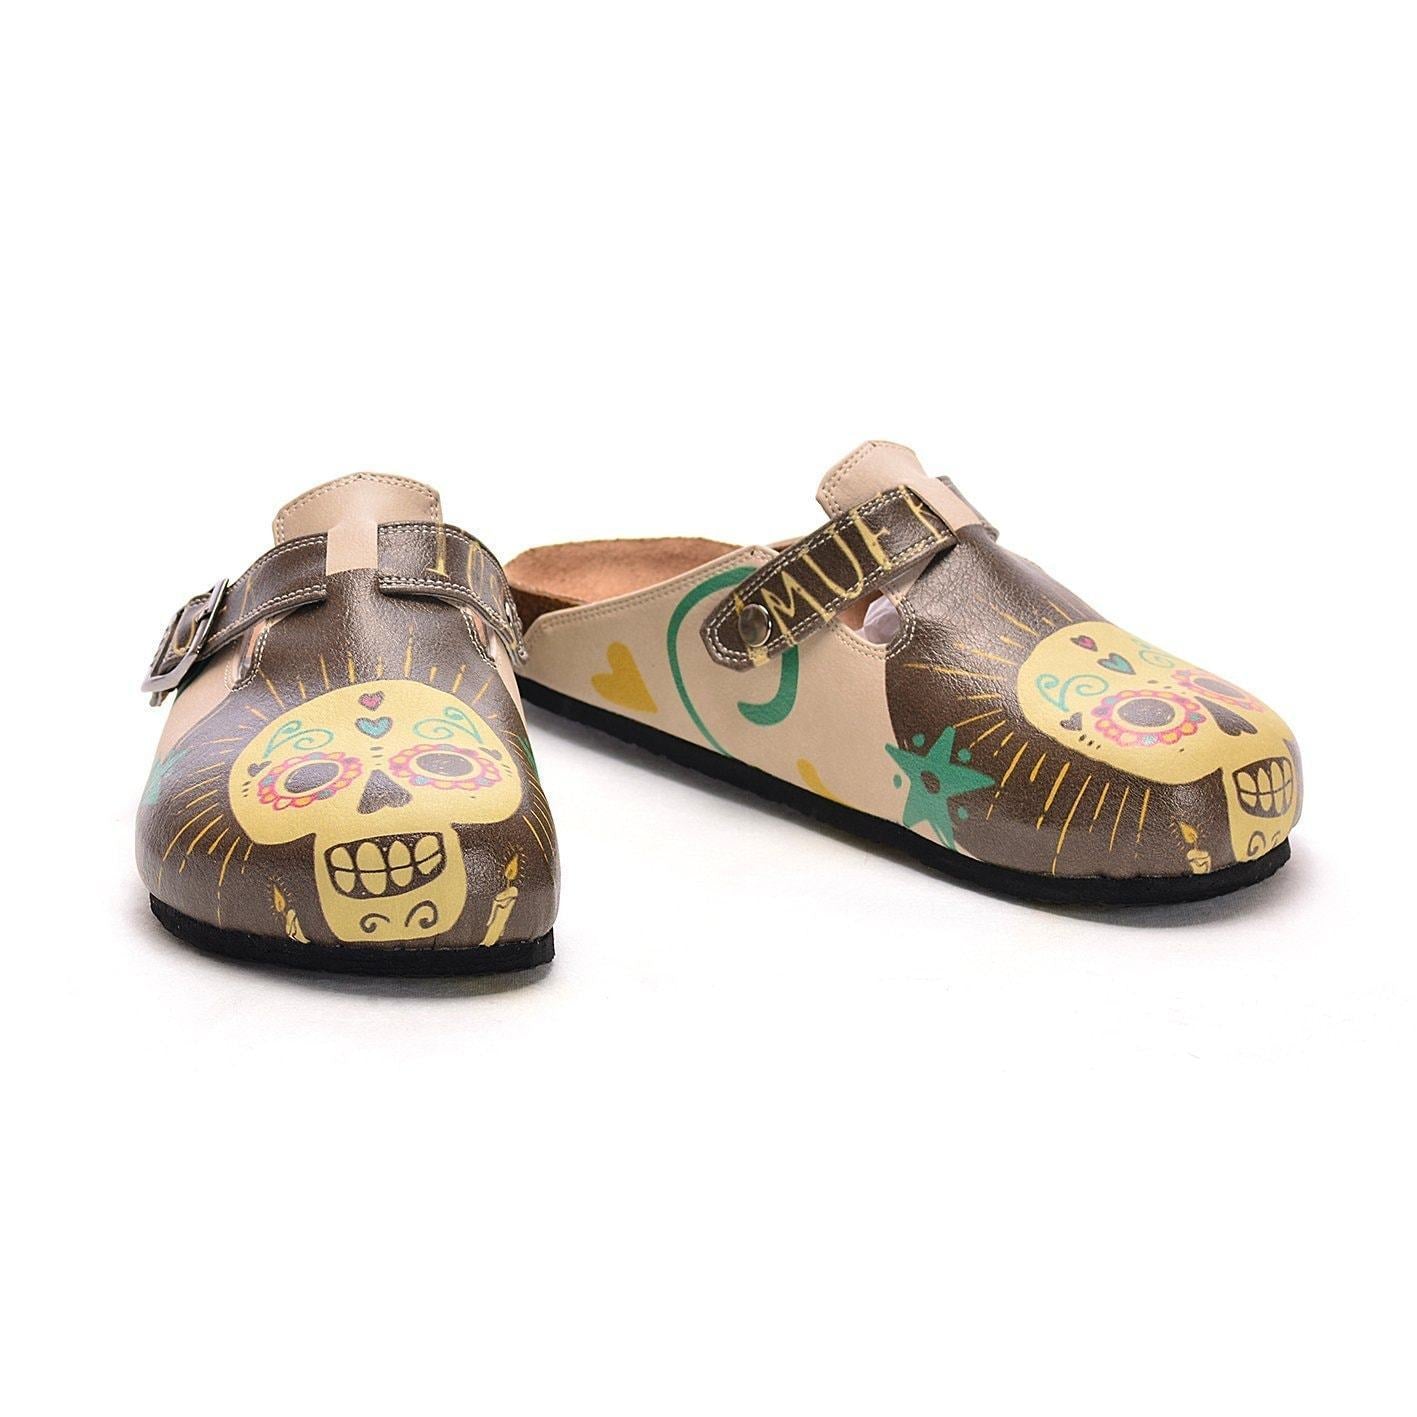 Brown & Yellow Sugar Skull Clogs CAL308, Goby, CALCEO Clogs 